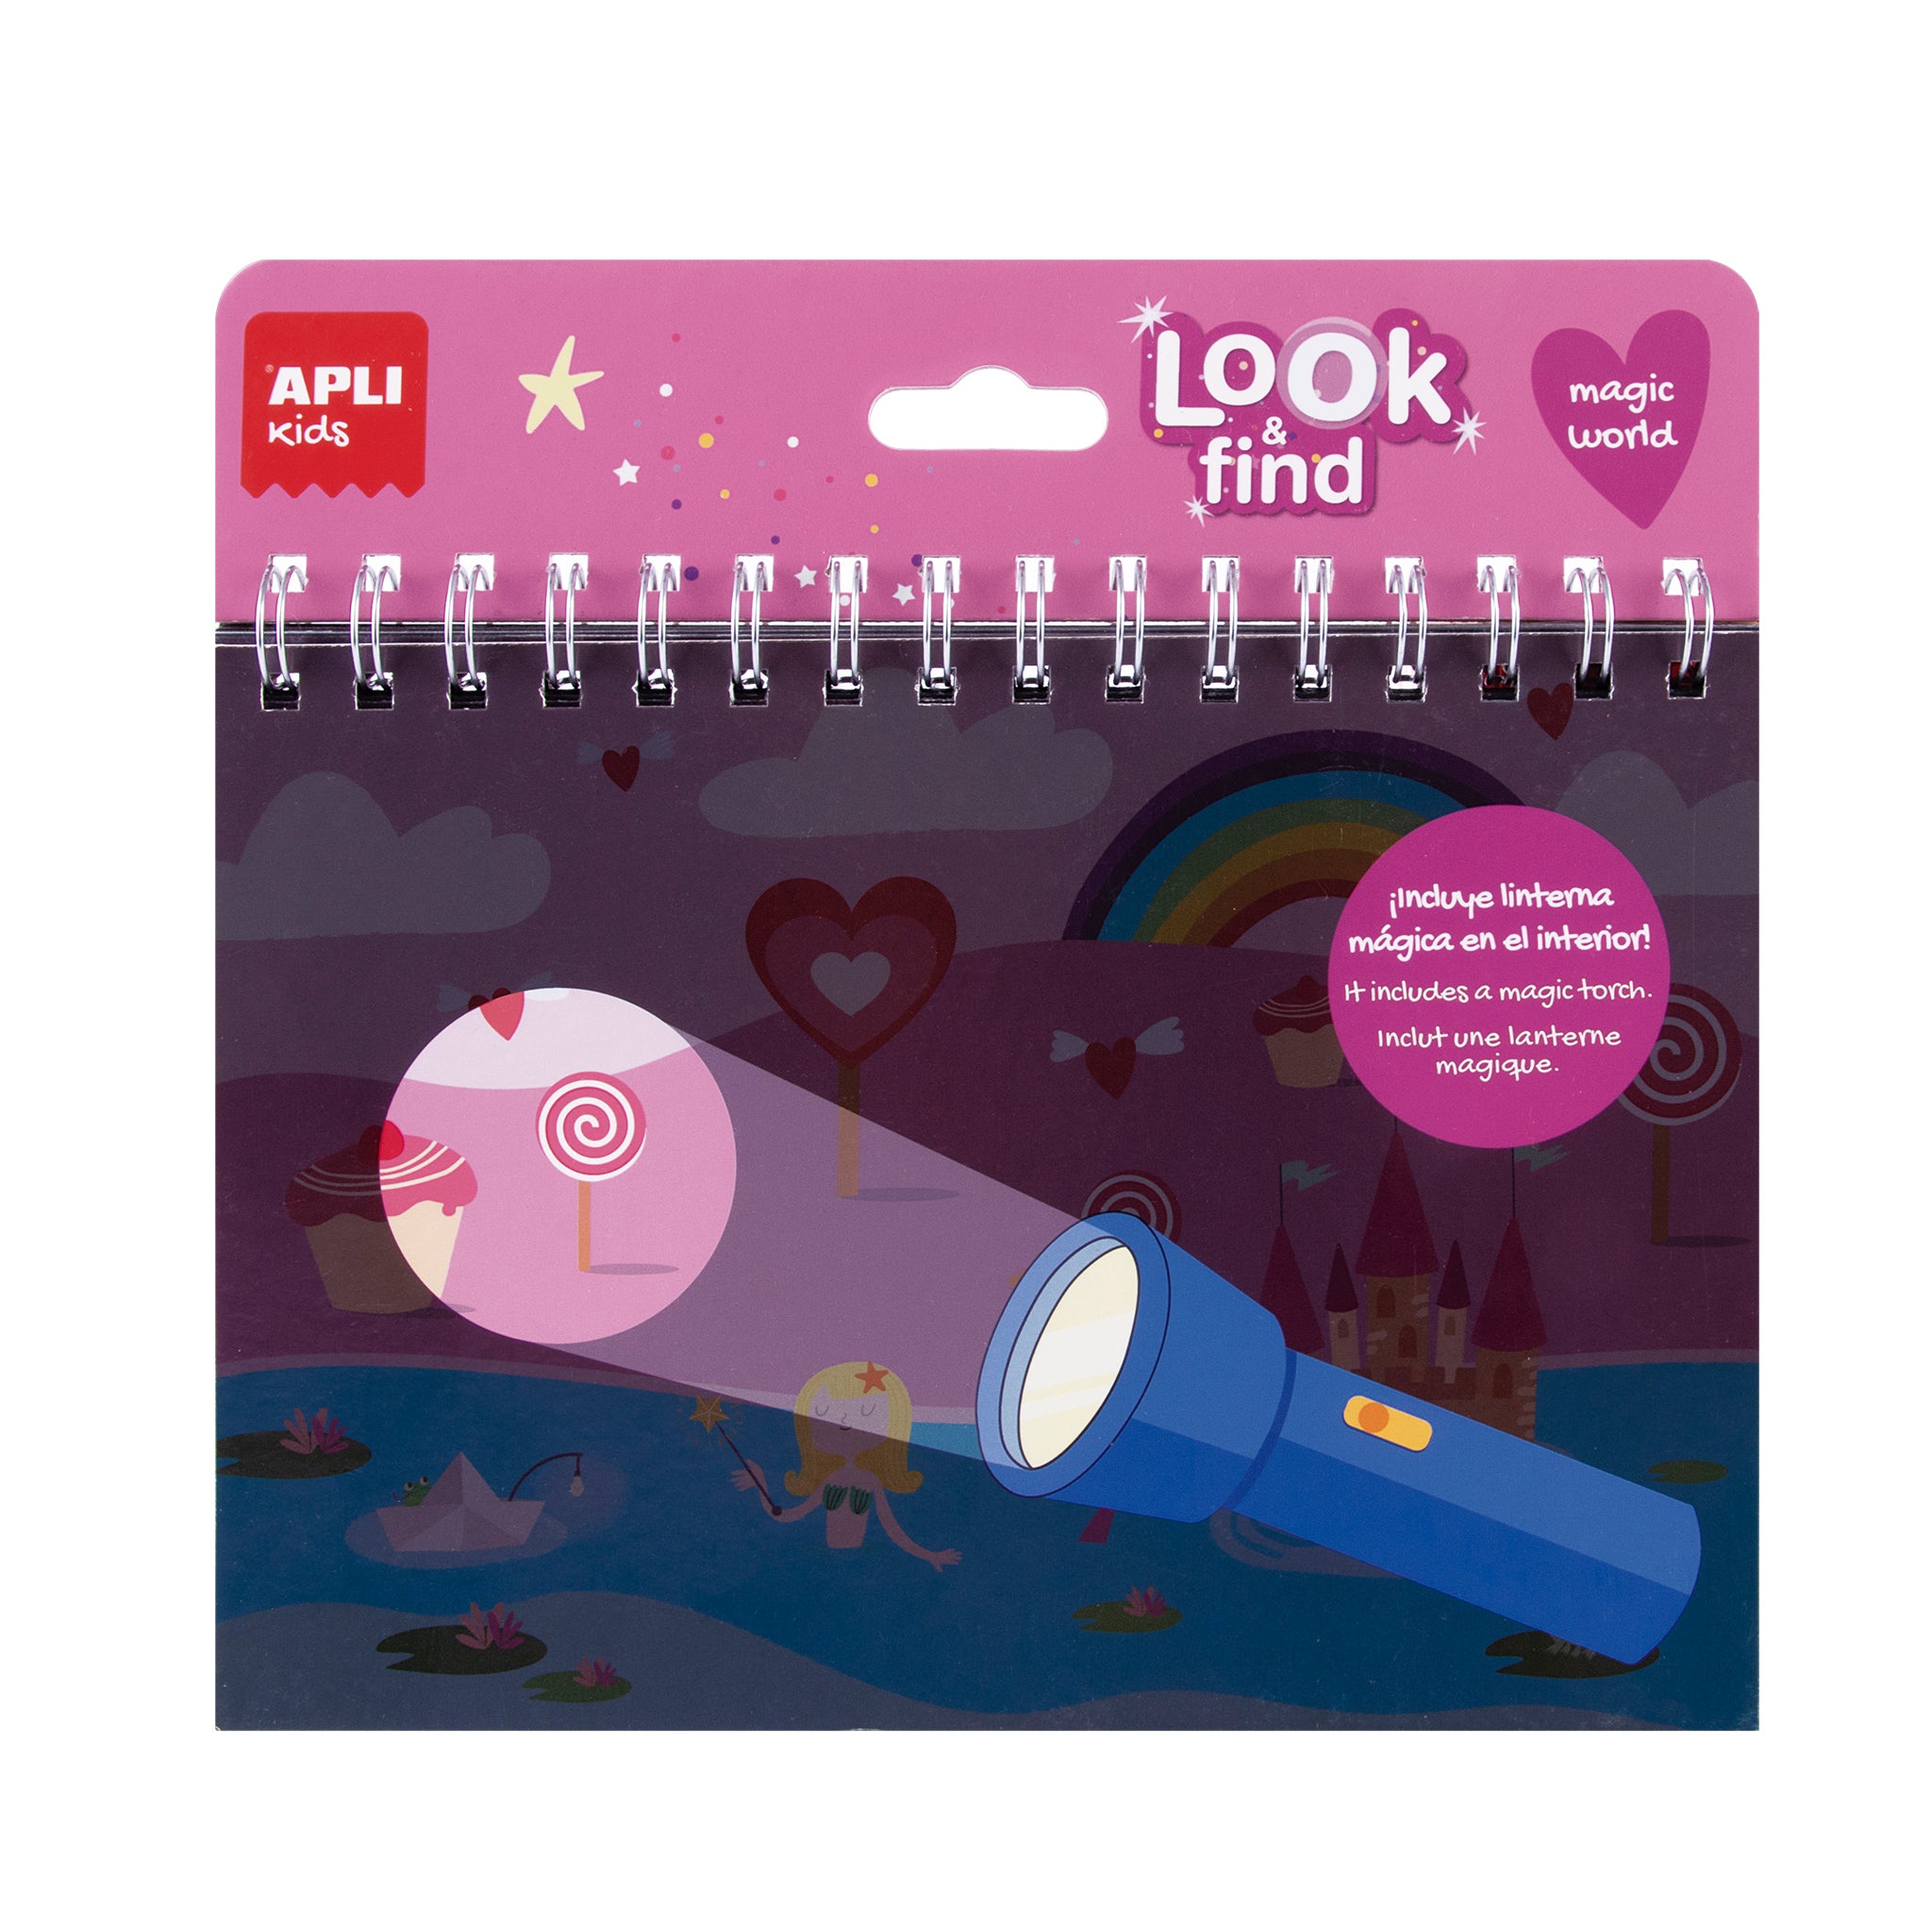 APLI KIDS: A booklet with a magic Look & Find flashlight